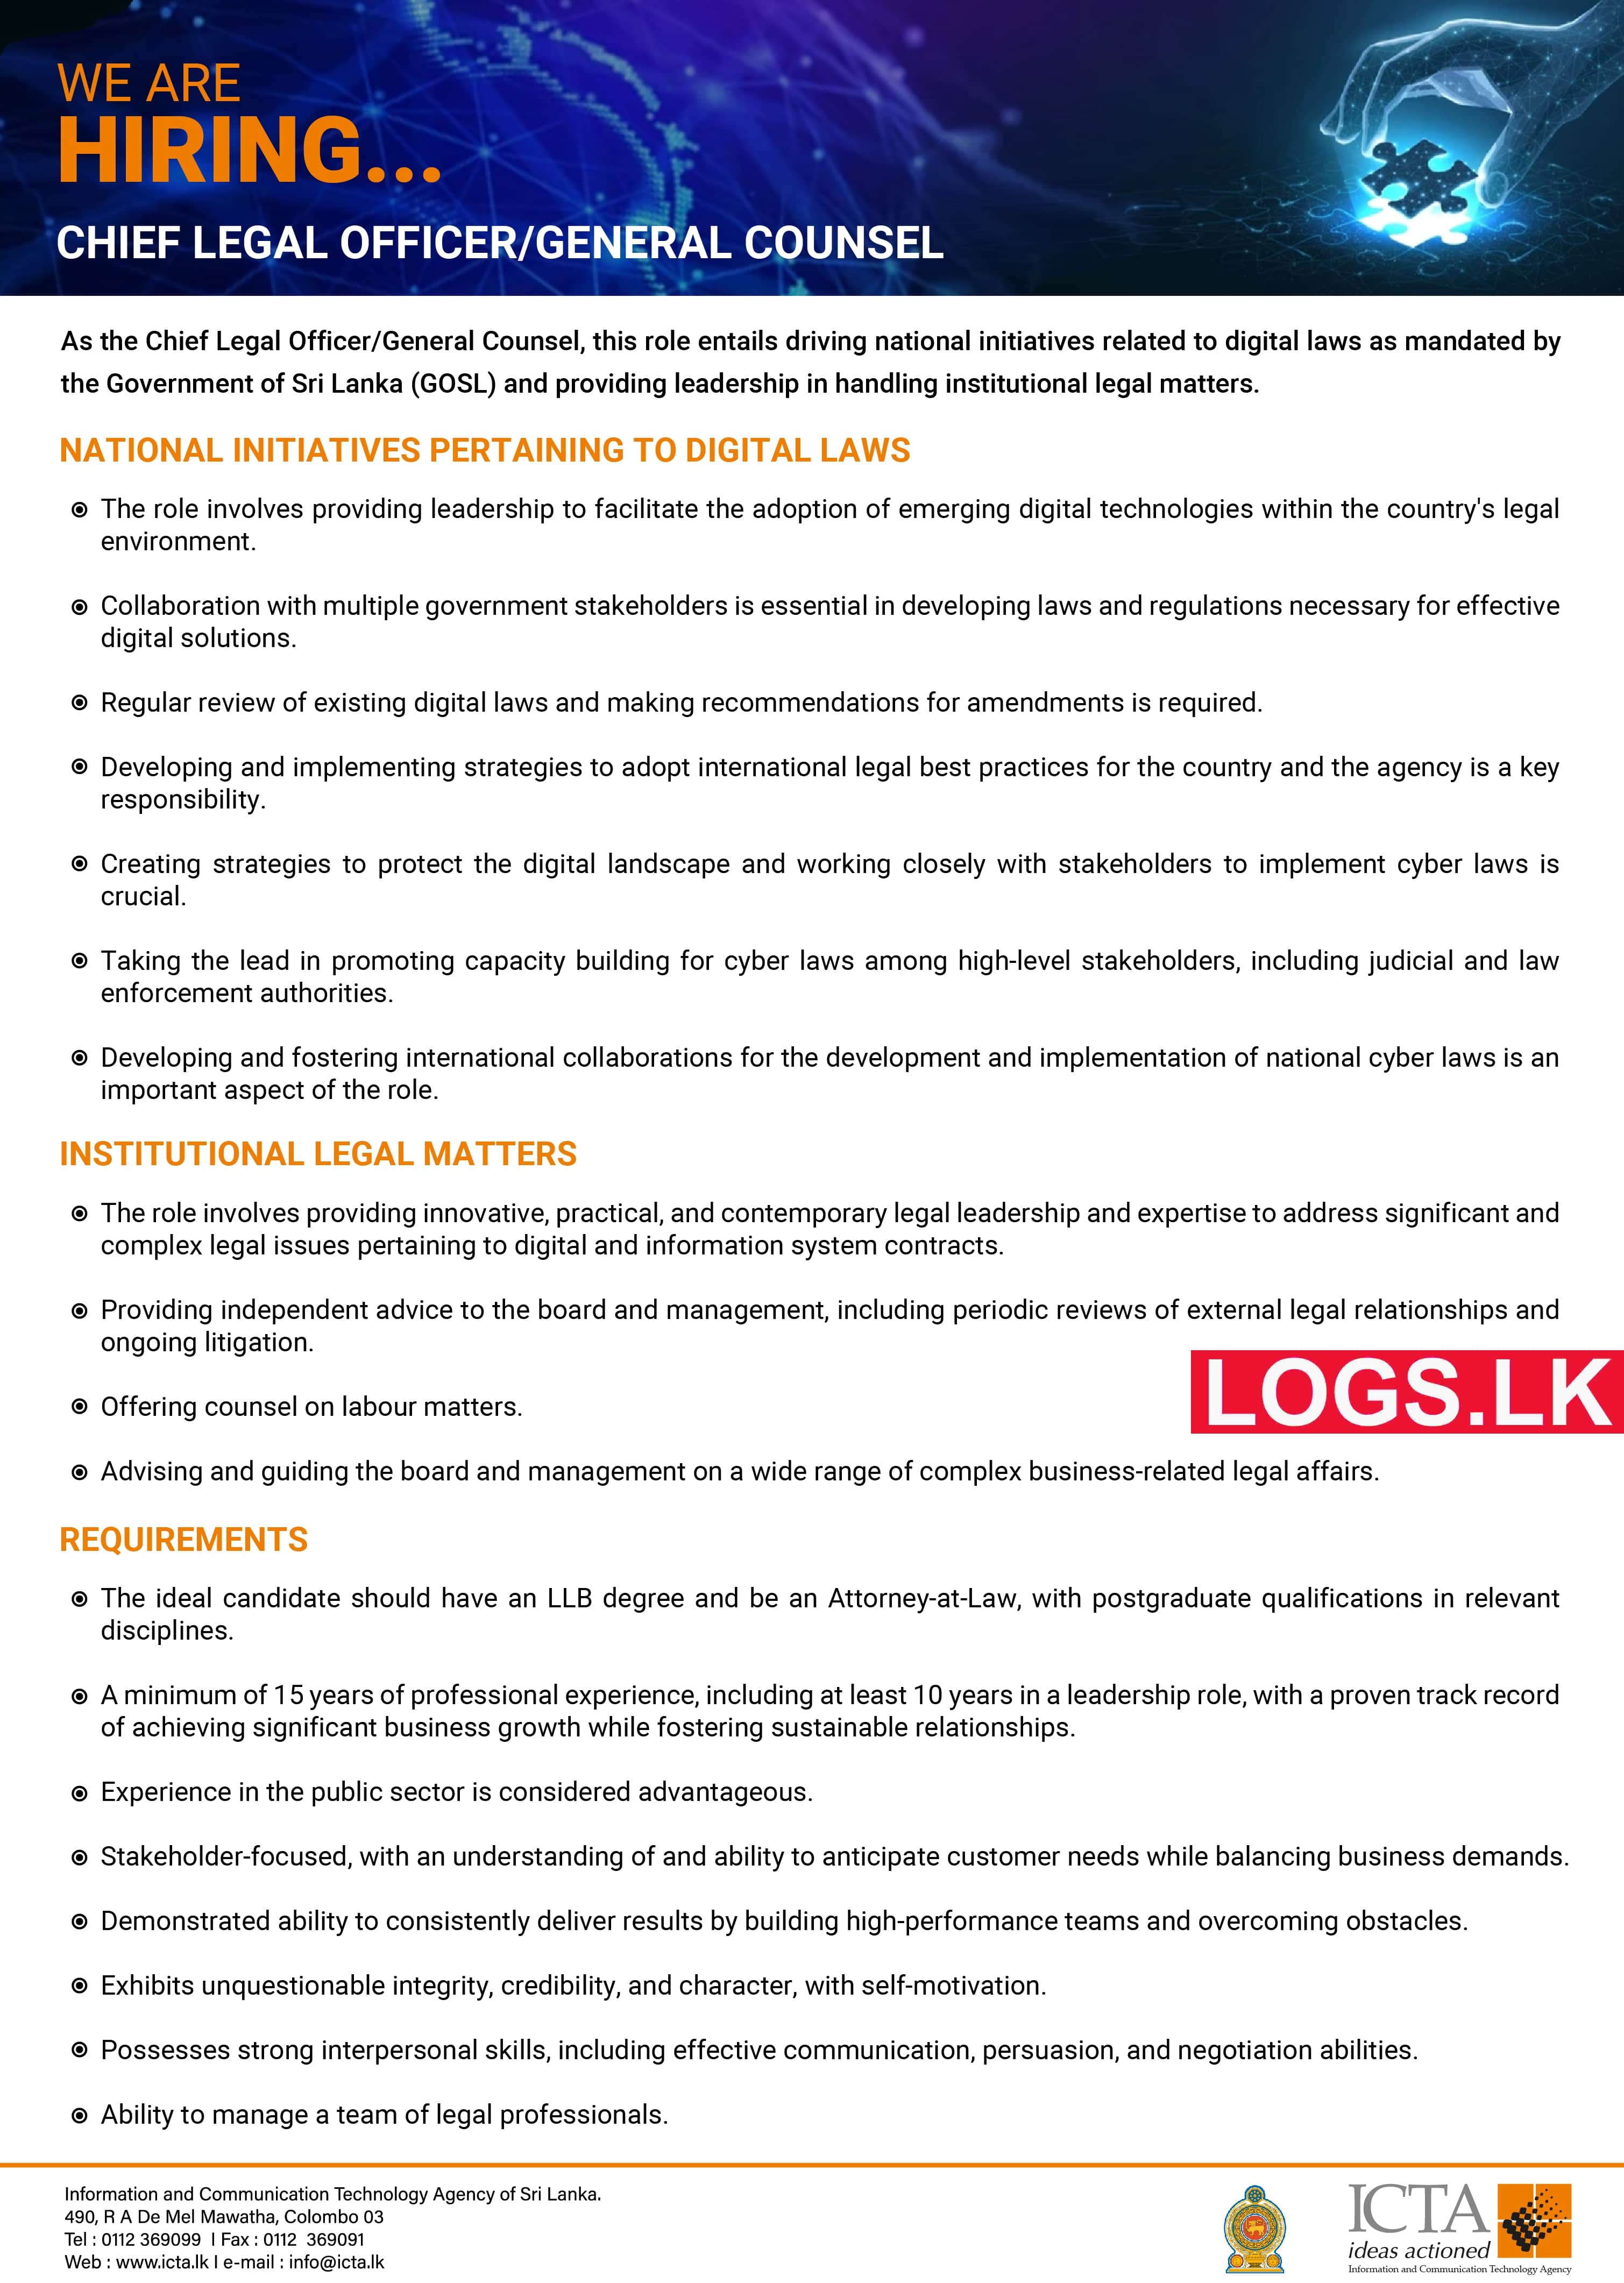 Chief Legal Officer - ICT Agency of Sri Lanka Vacancies 2023 Application Form